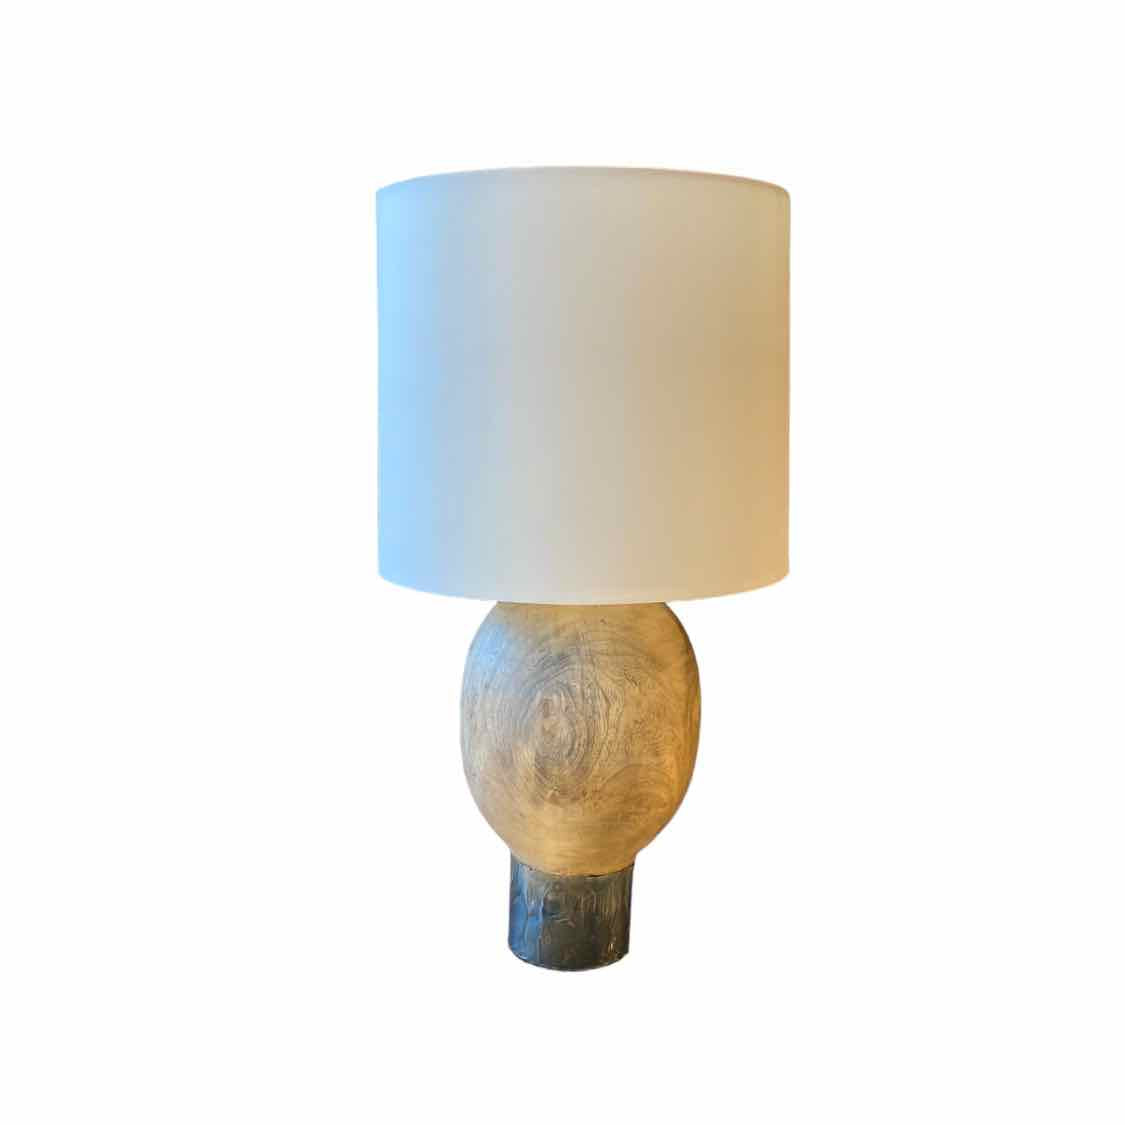 Round Wooden Buoy Style Table Lamp - colletteconsignment.com